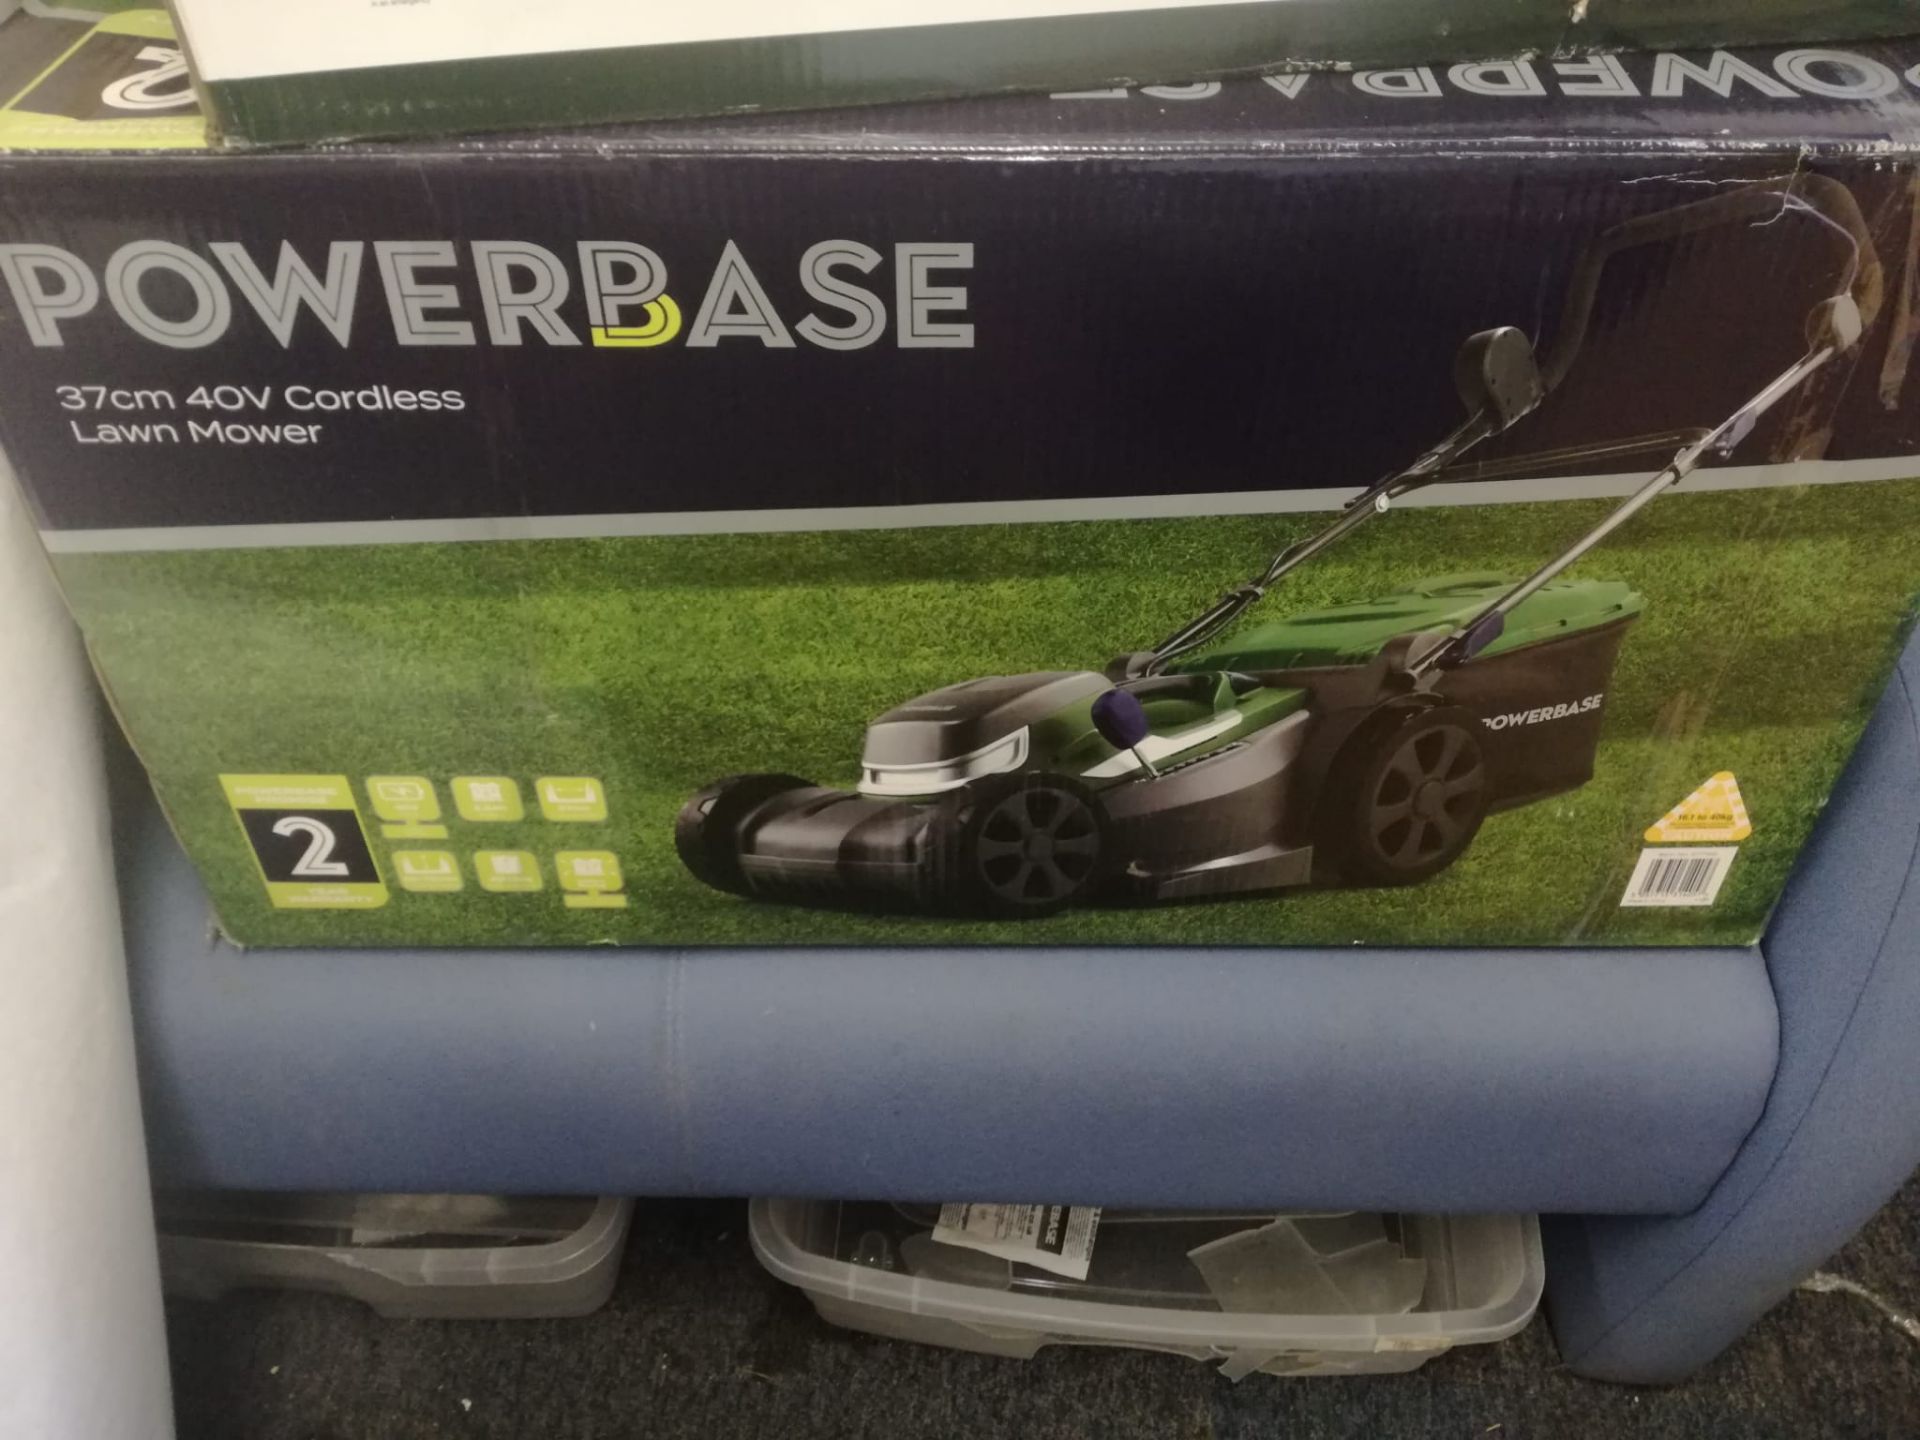 NEW POWERBASE 37cm 40v CORDLESS LAWN MOWER, TESTED WORKING, IN BOX *NO VAT*